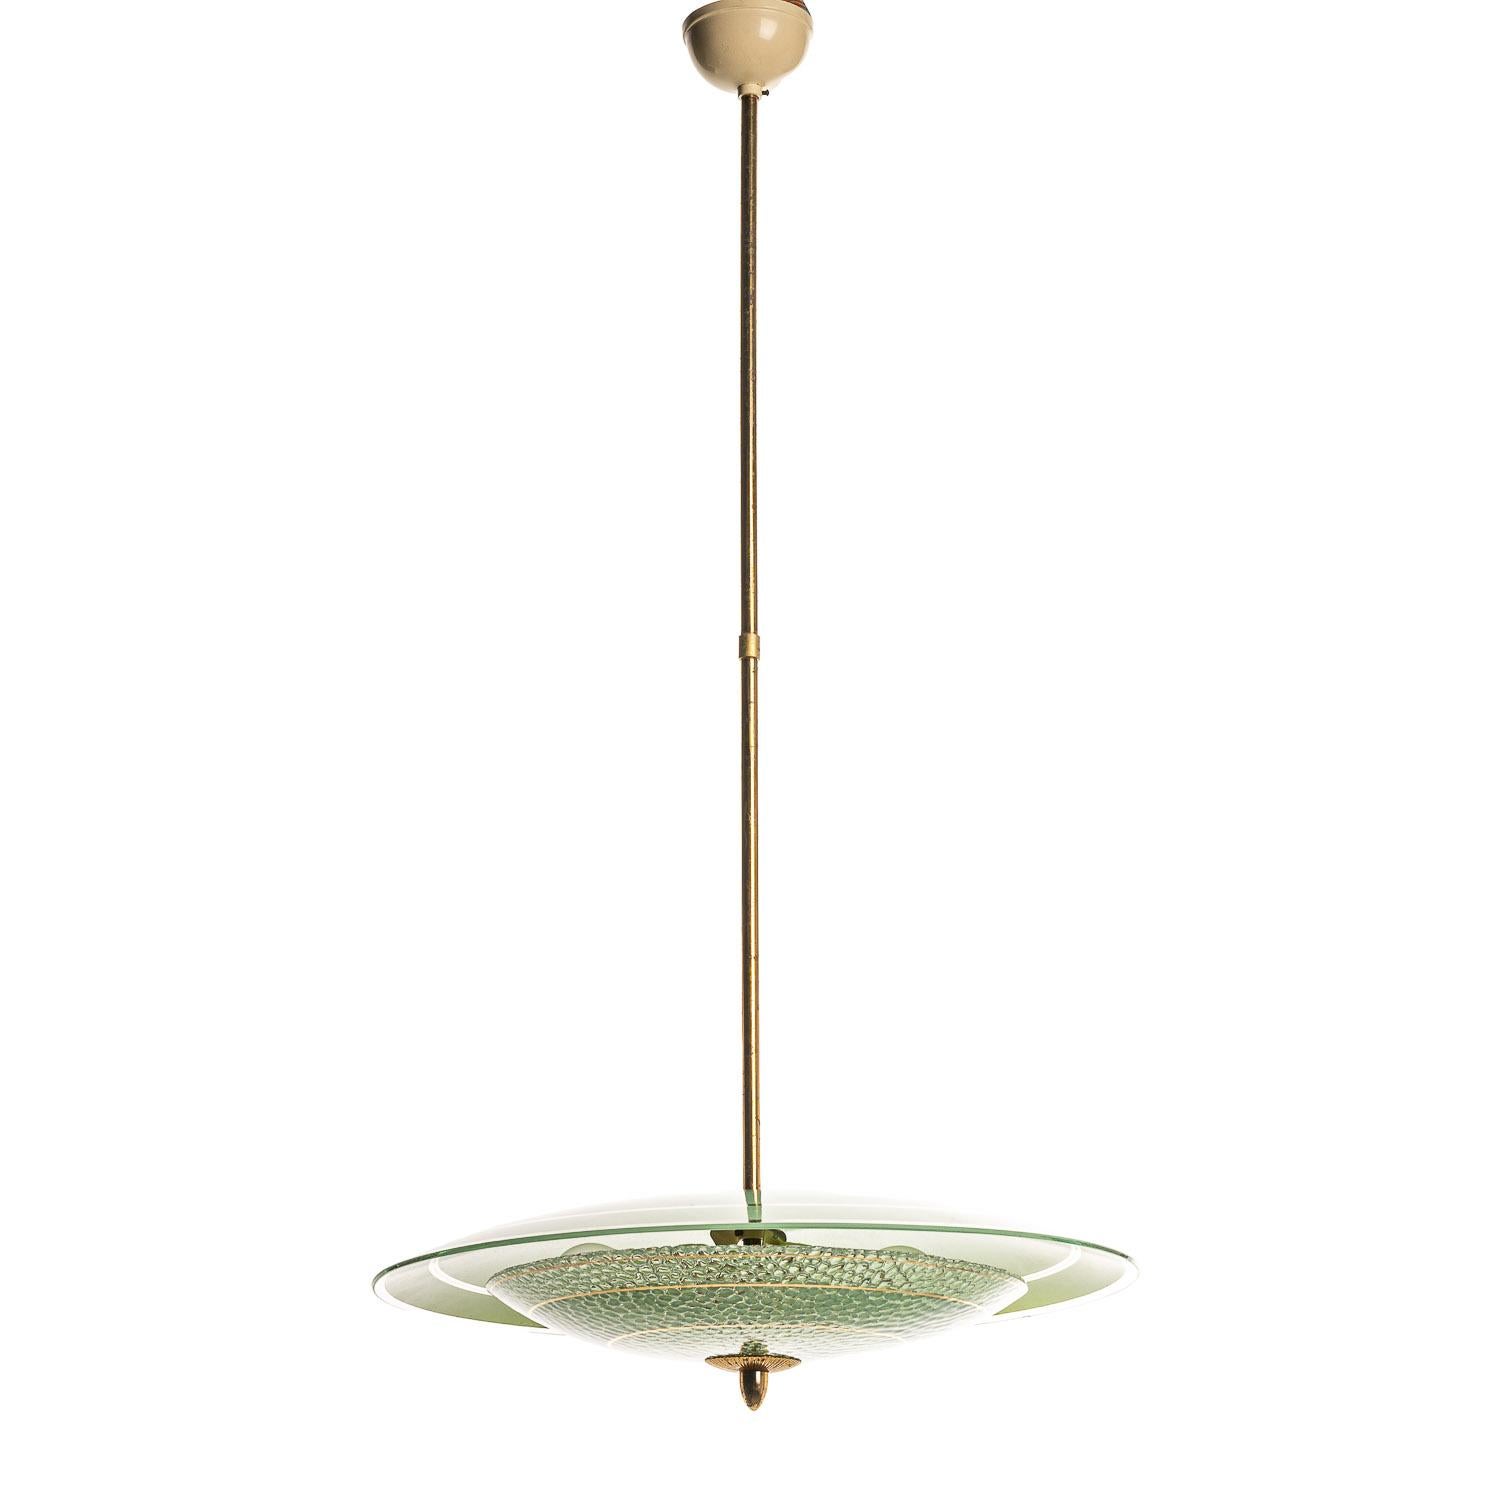 This playful piece consists of a brass frame connecting two unique frosted glass reflectors in green. 
The lower glass reflector has a bubble-texture and is accented with gold-colored rings. This mounts underneath a round, green frosted glass